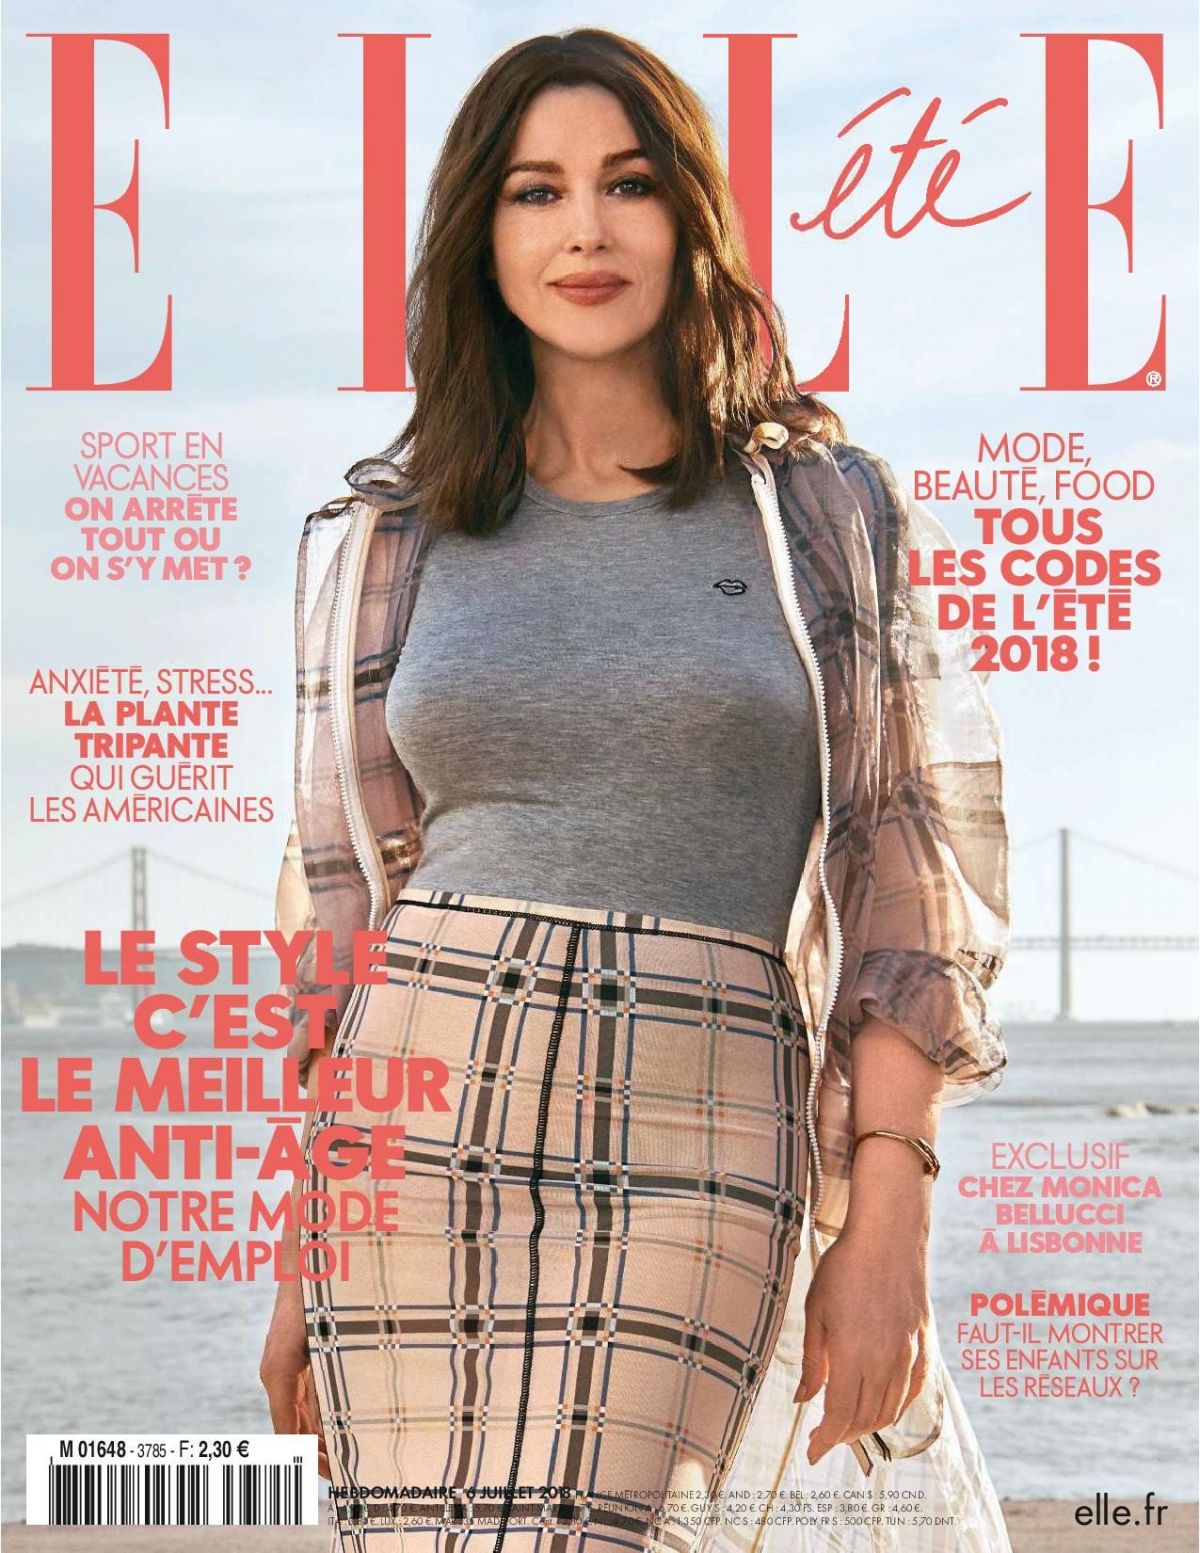 monica-bellucci-in-elle-magazine-france-july-2018-issue-17.jpg